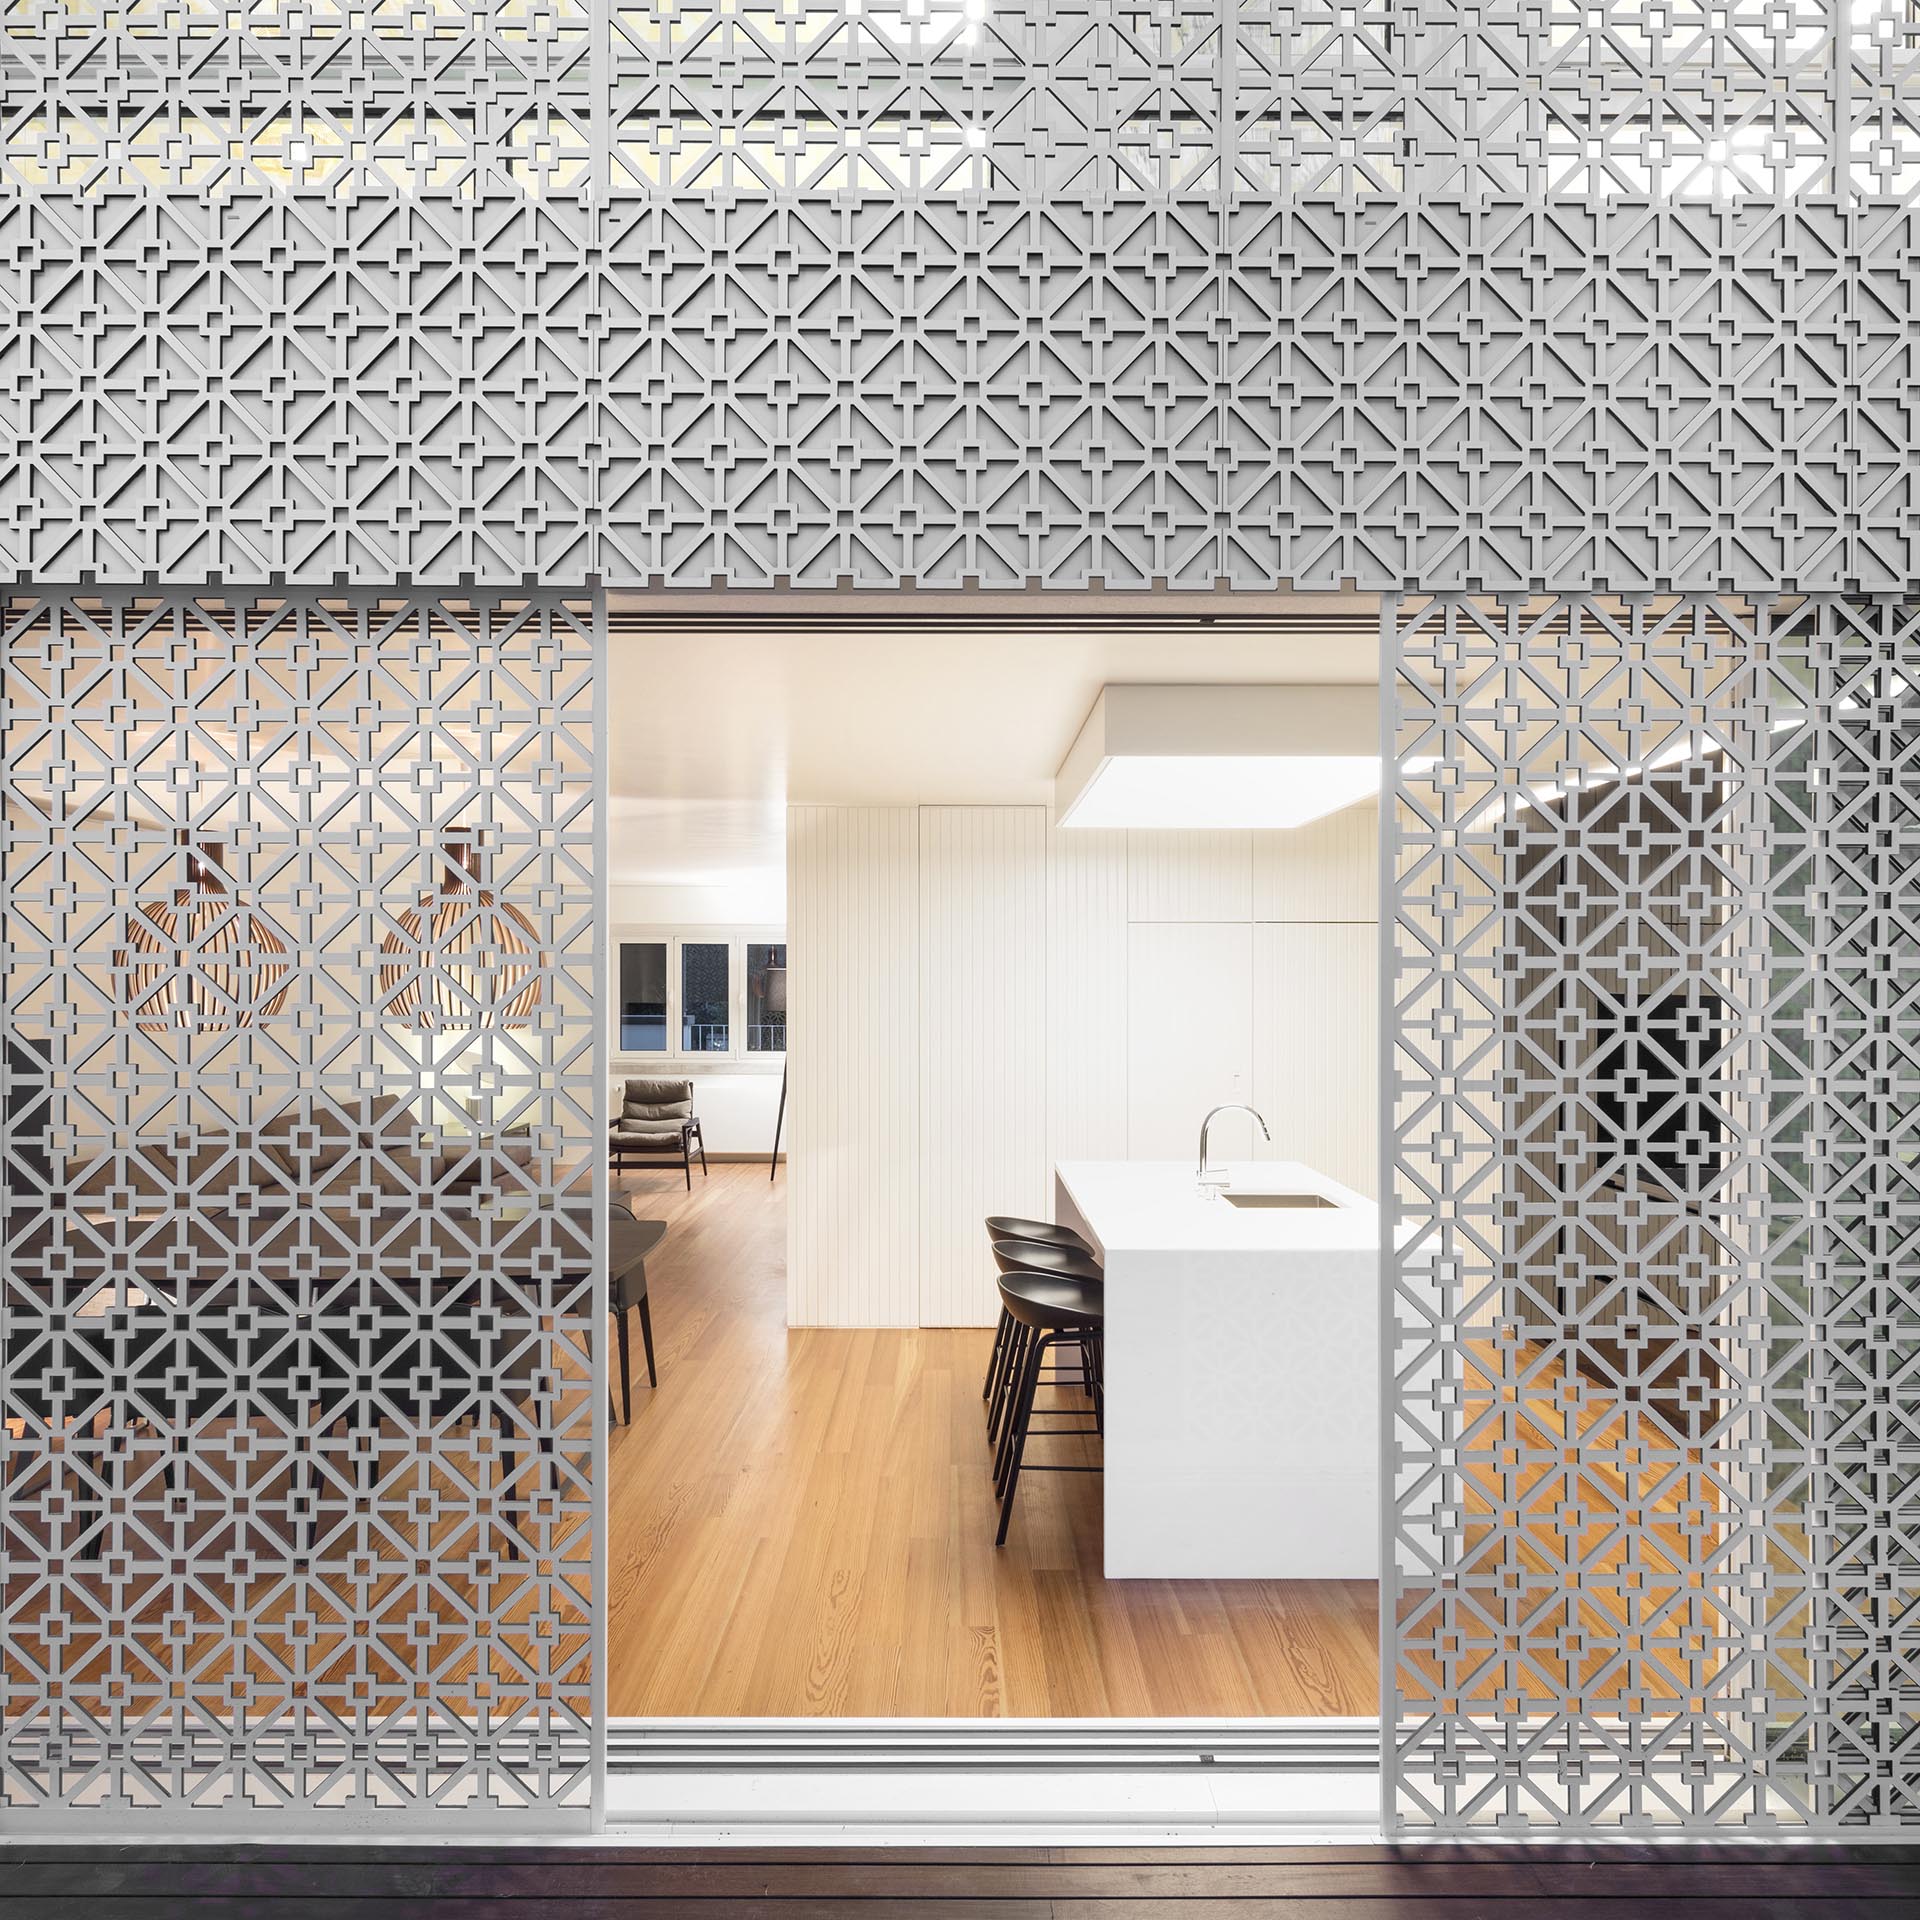 Sliding patterned screens add a decorative element to this house, as well act as a sunlight filter and a security screen